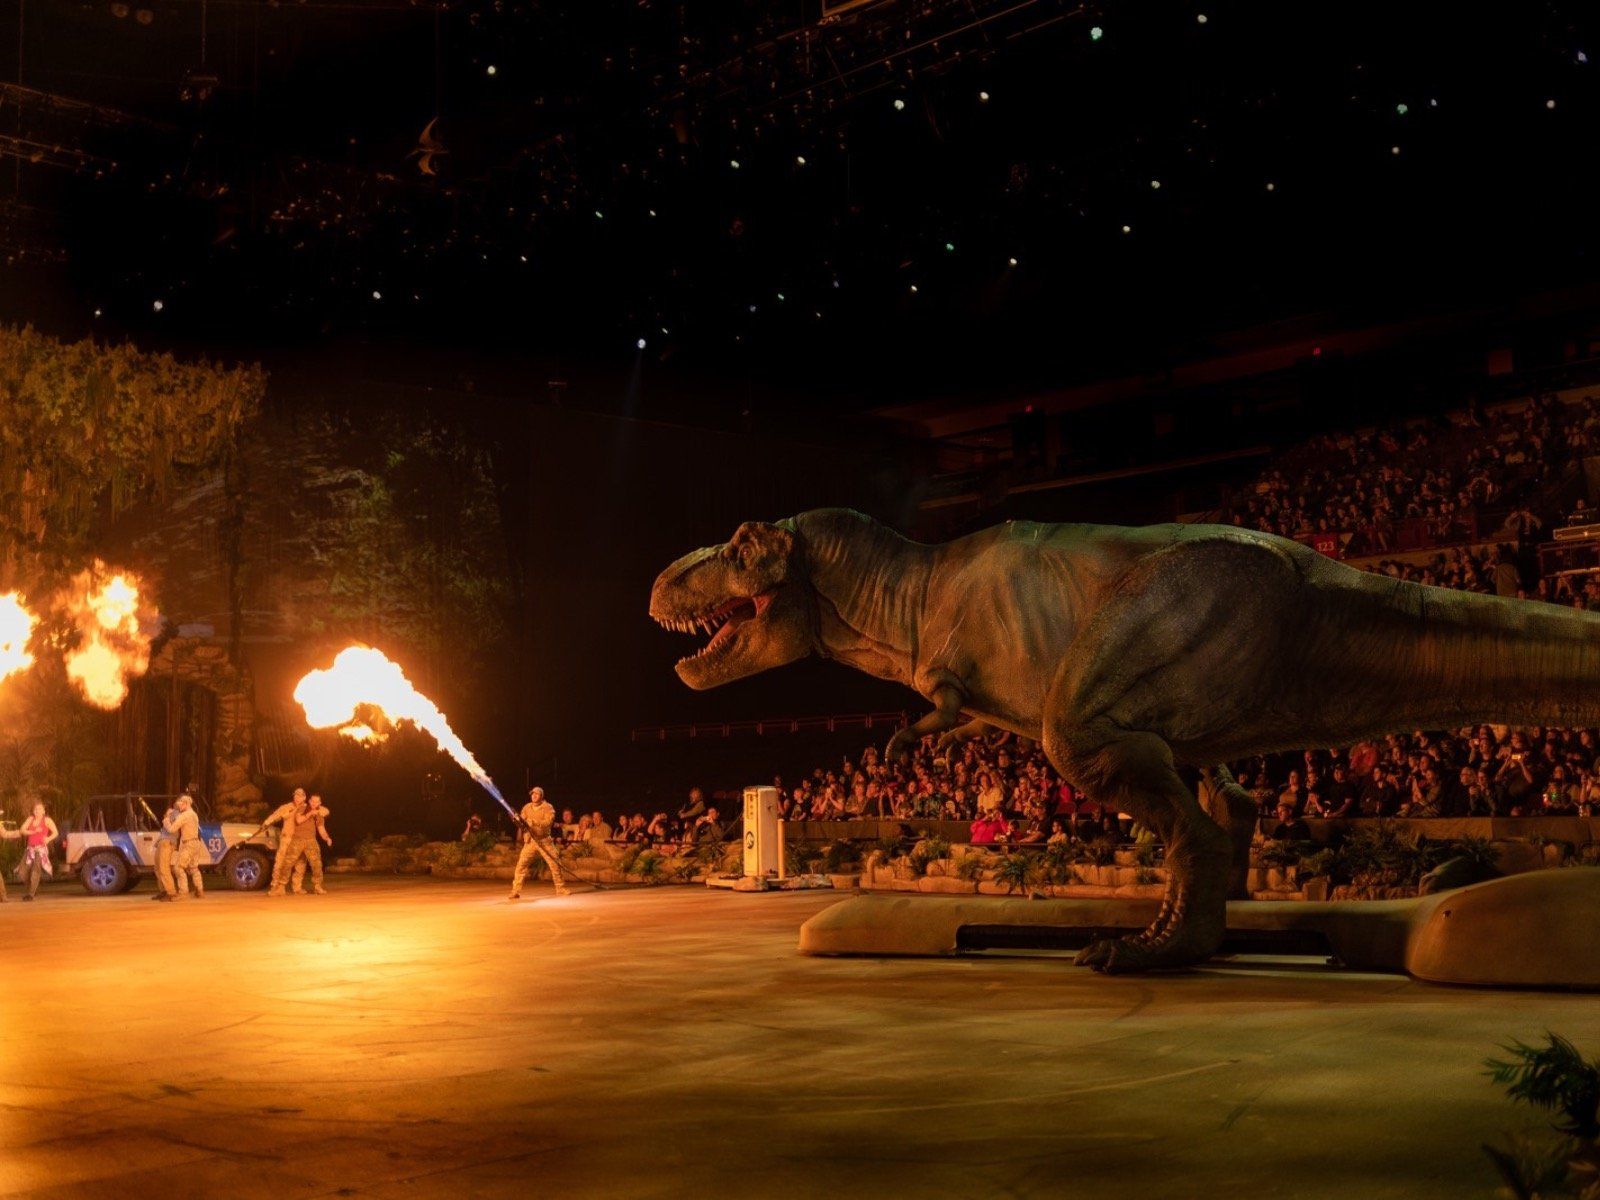 reasons to check out Jurassic World Live Tour